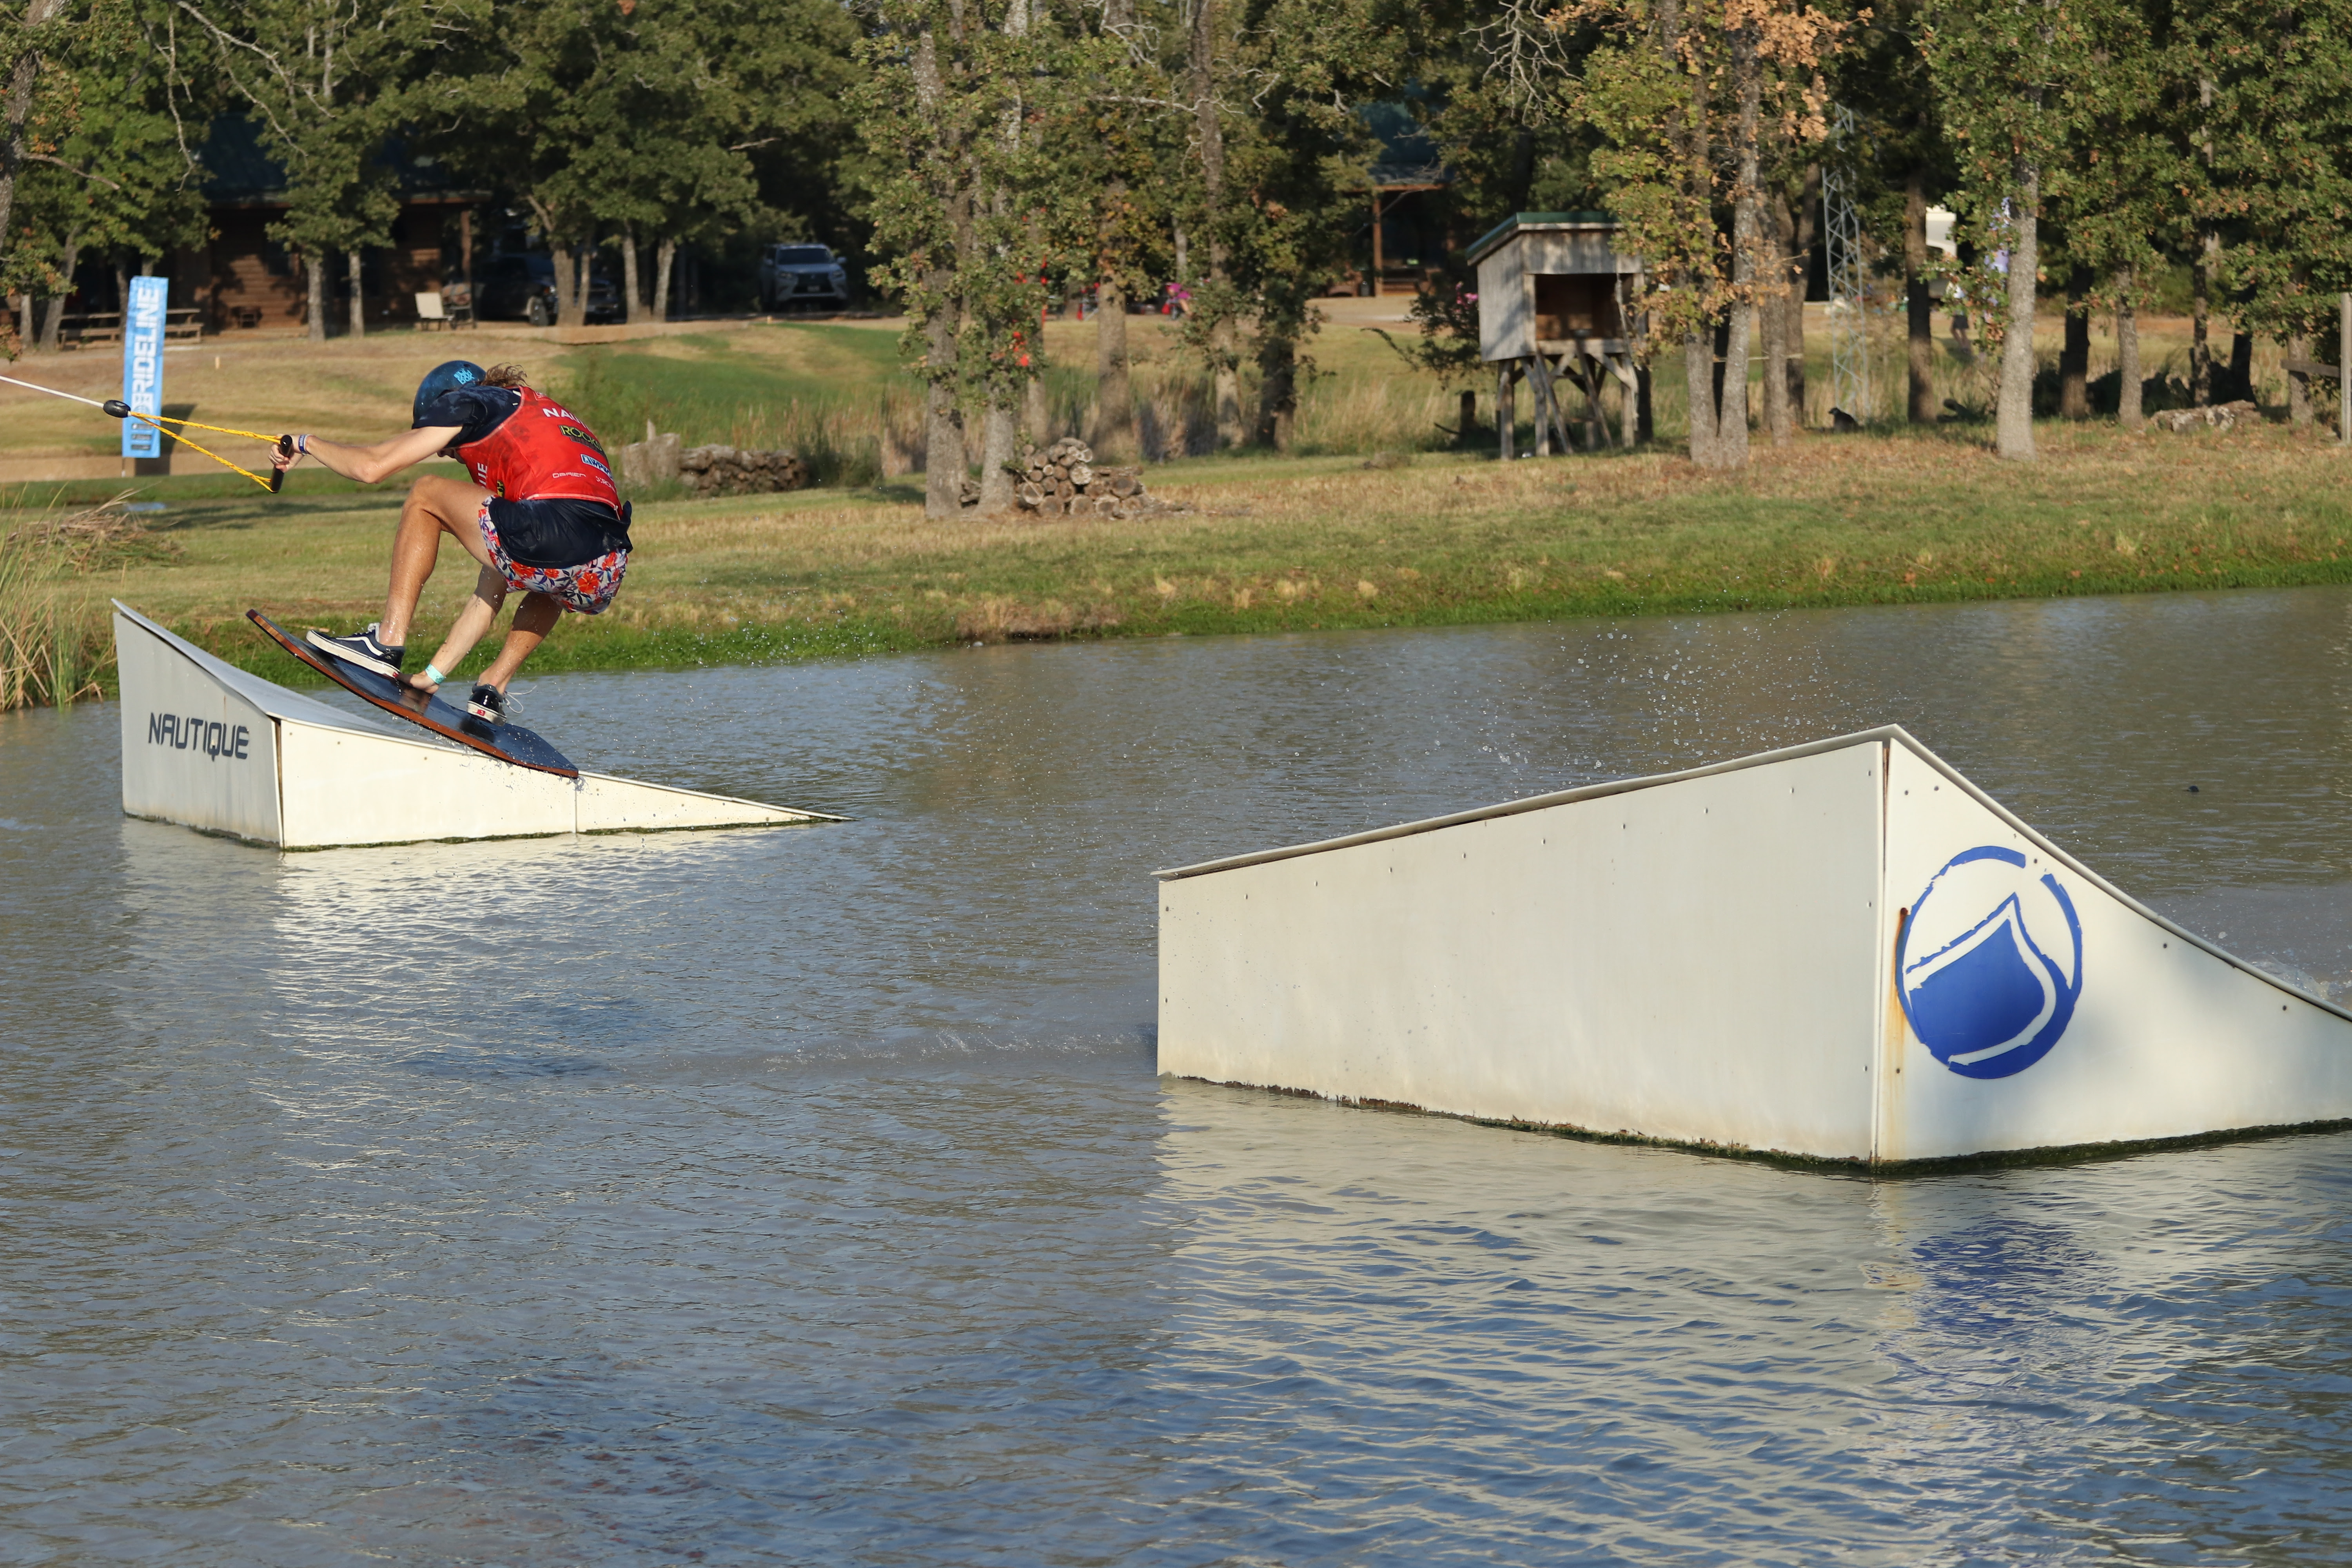 Amateur Traditional Divisions Kick Off The 2019 Nautique WWA Wake Park National Championships Presented by Rockstar Energy